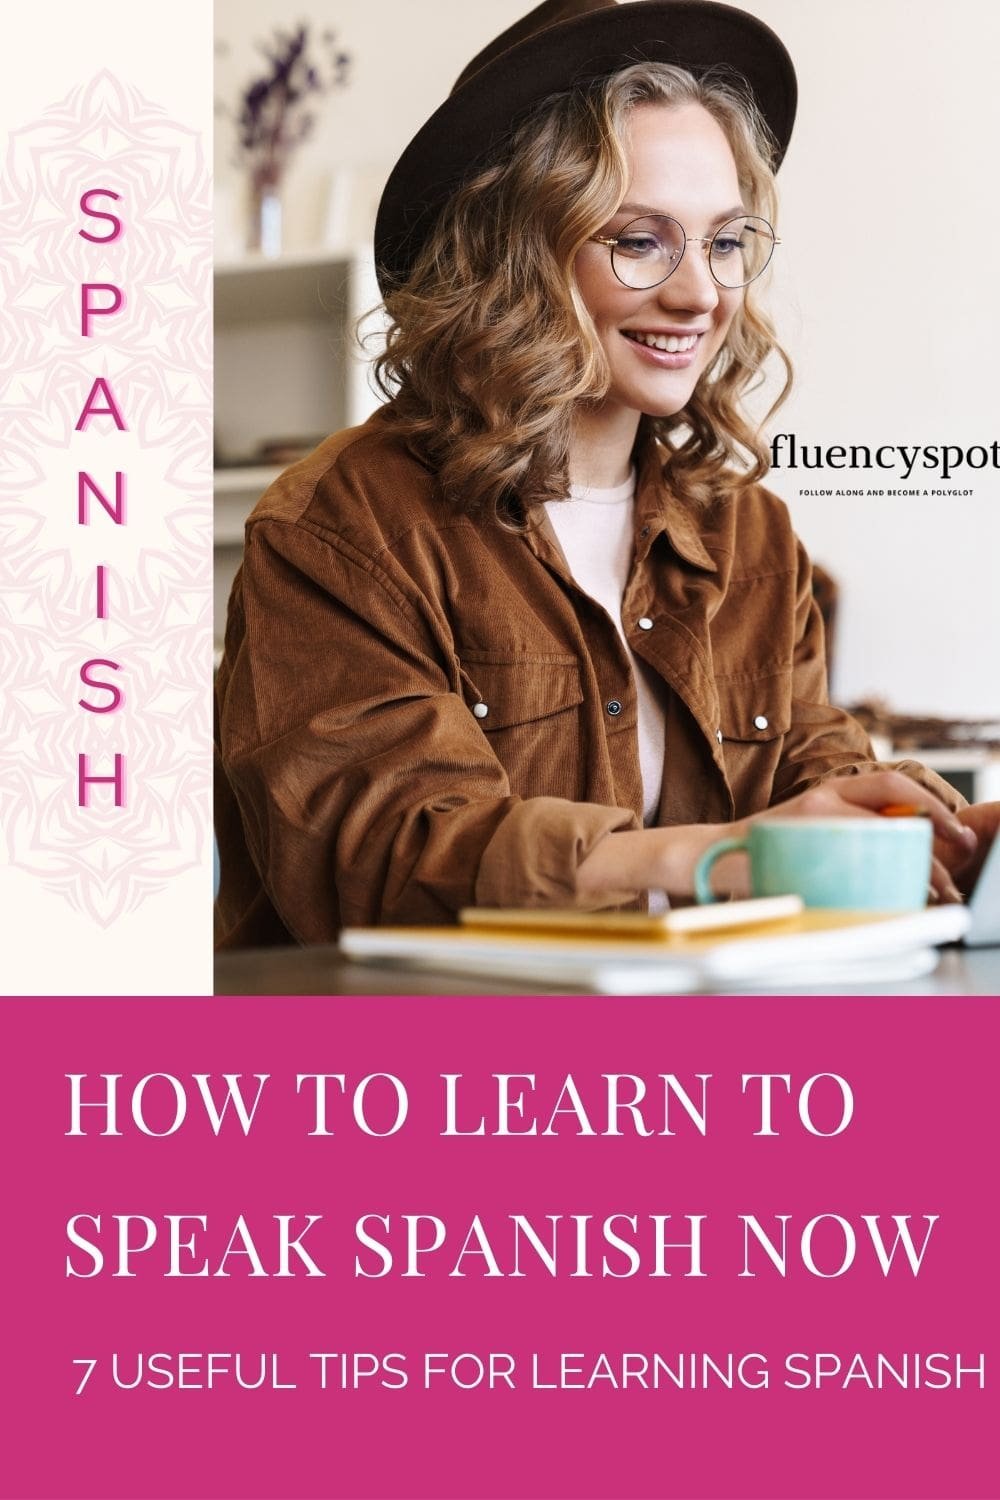 How To Learn To Speak Spanish Now. 7 Useful Tips For Learning Spanish